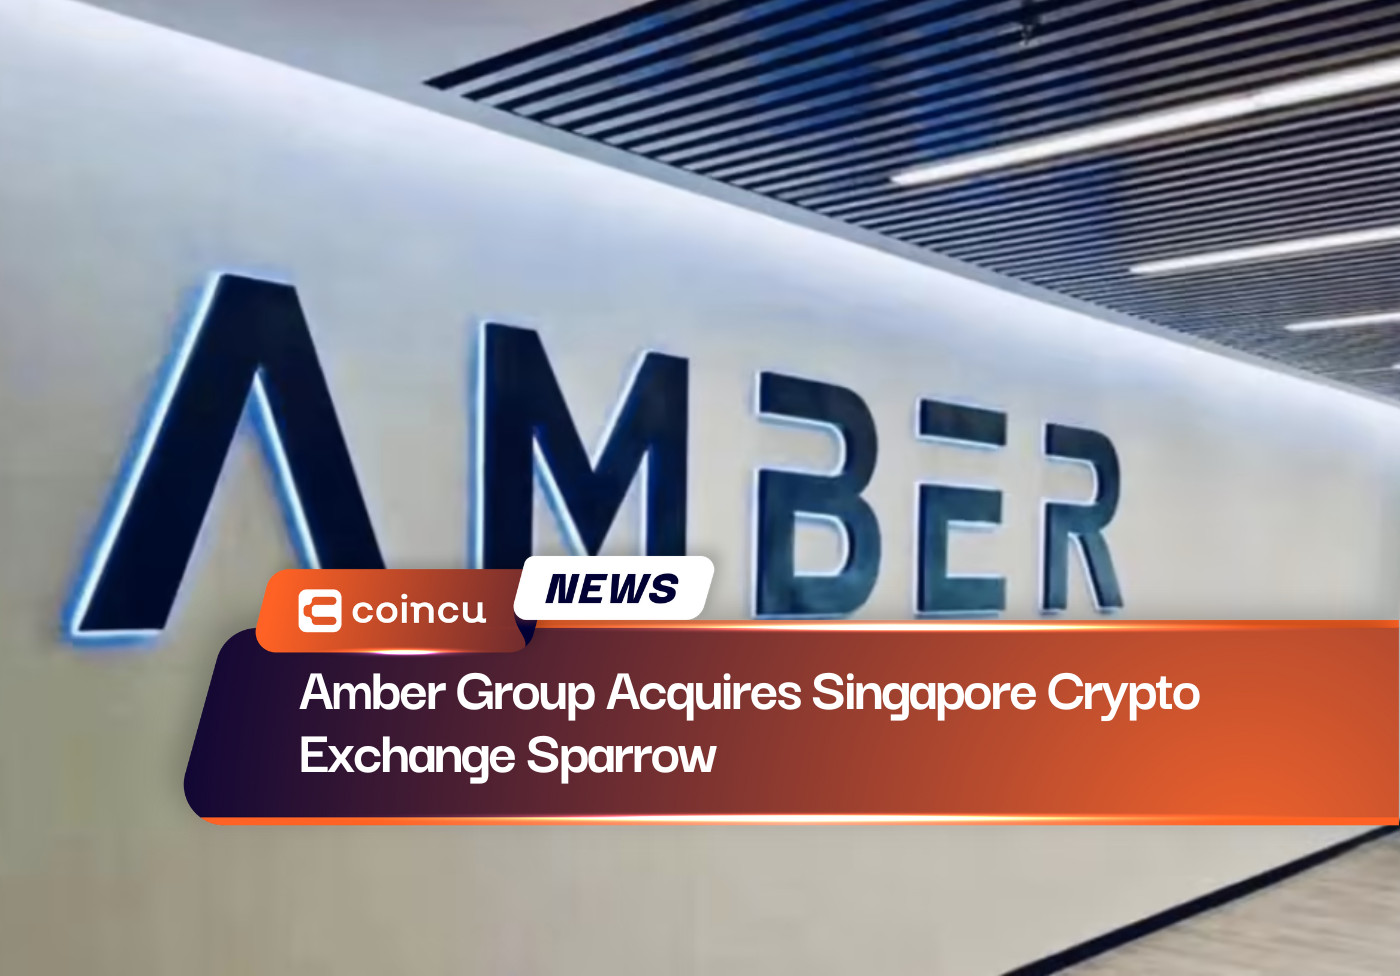 Amber Group Acquires Singapore Crypto Exchange Sparrow